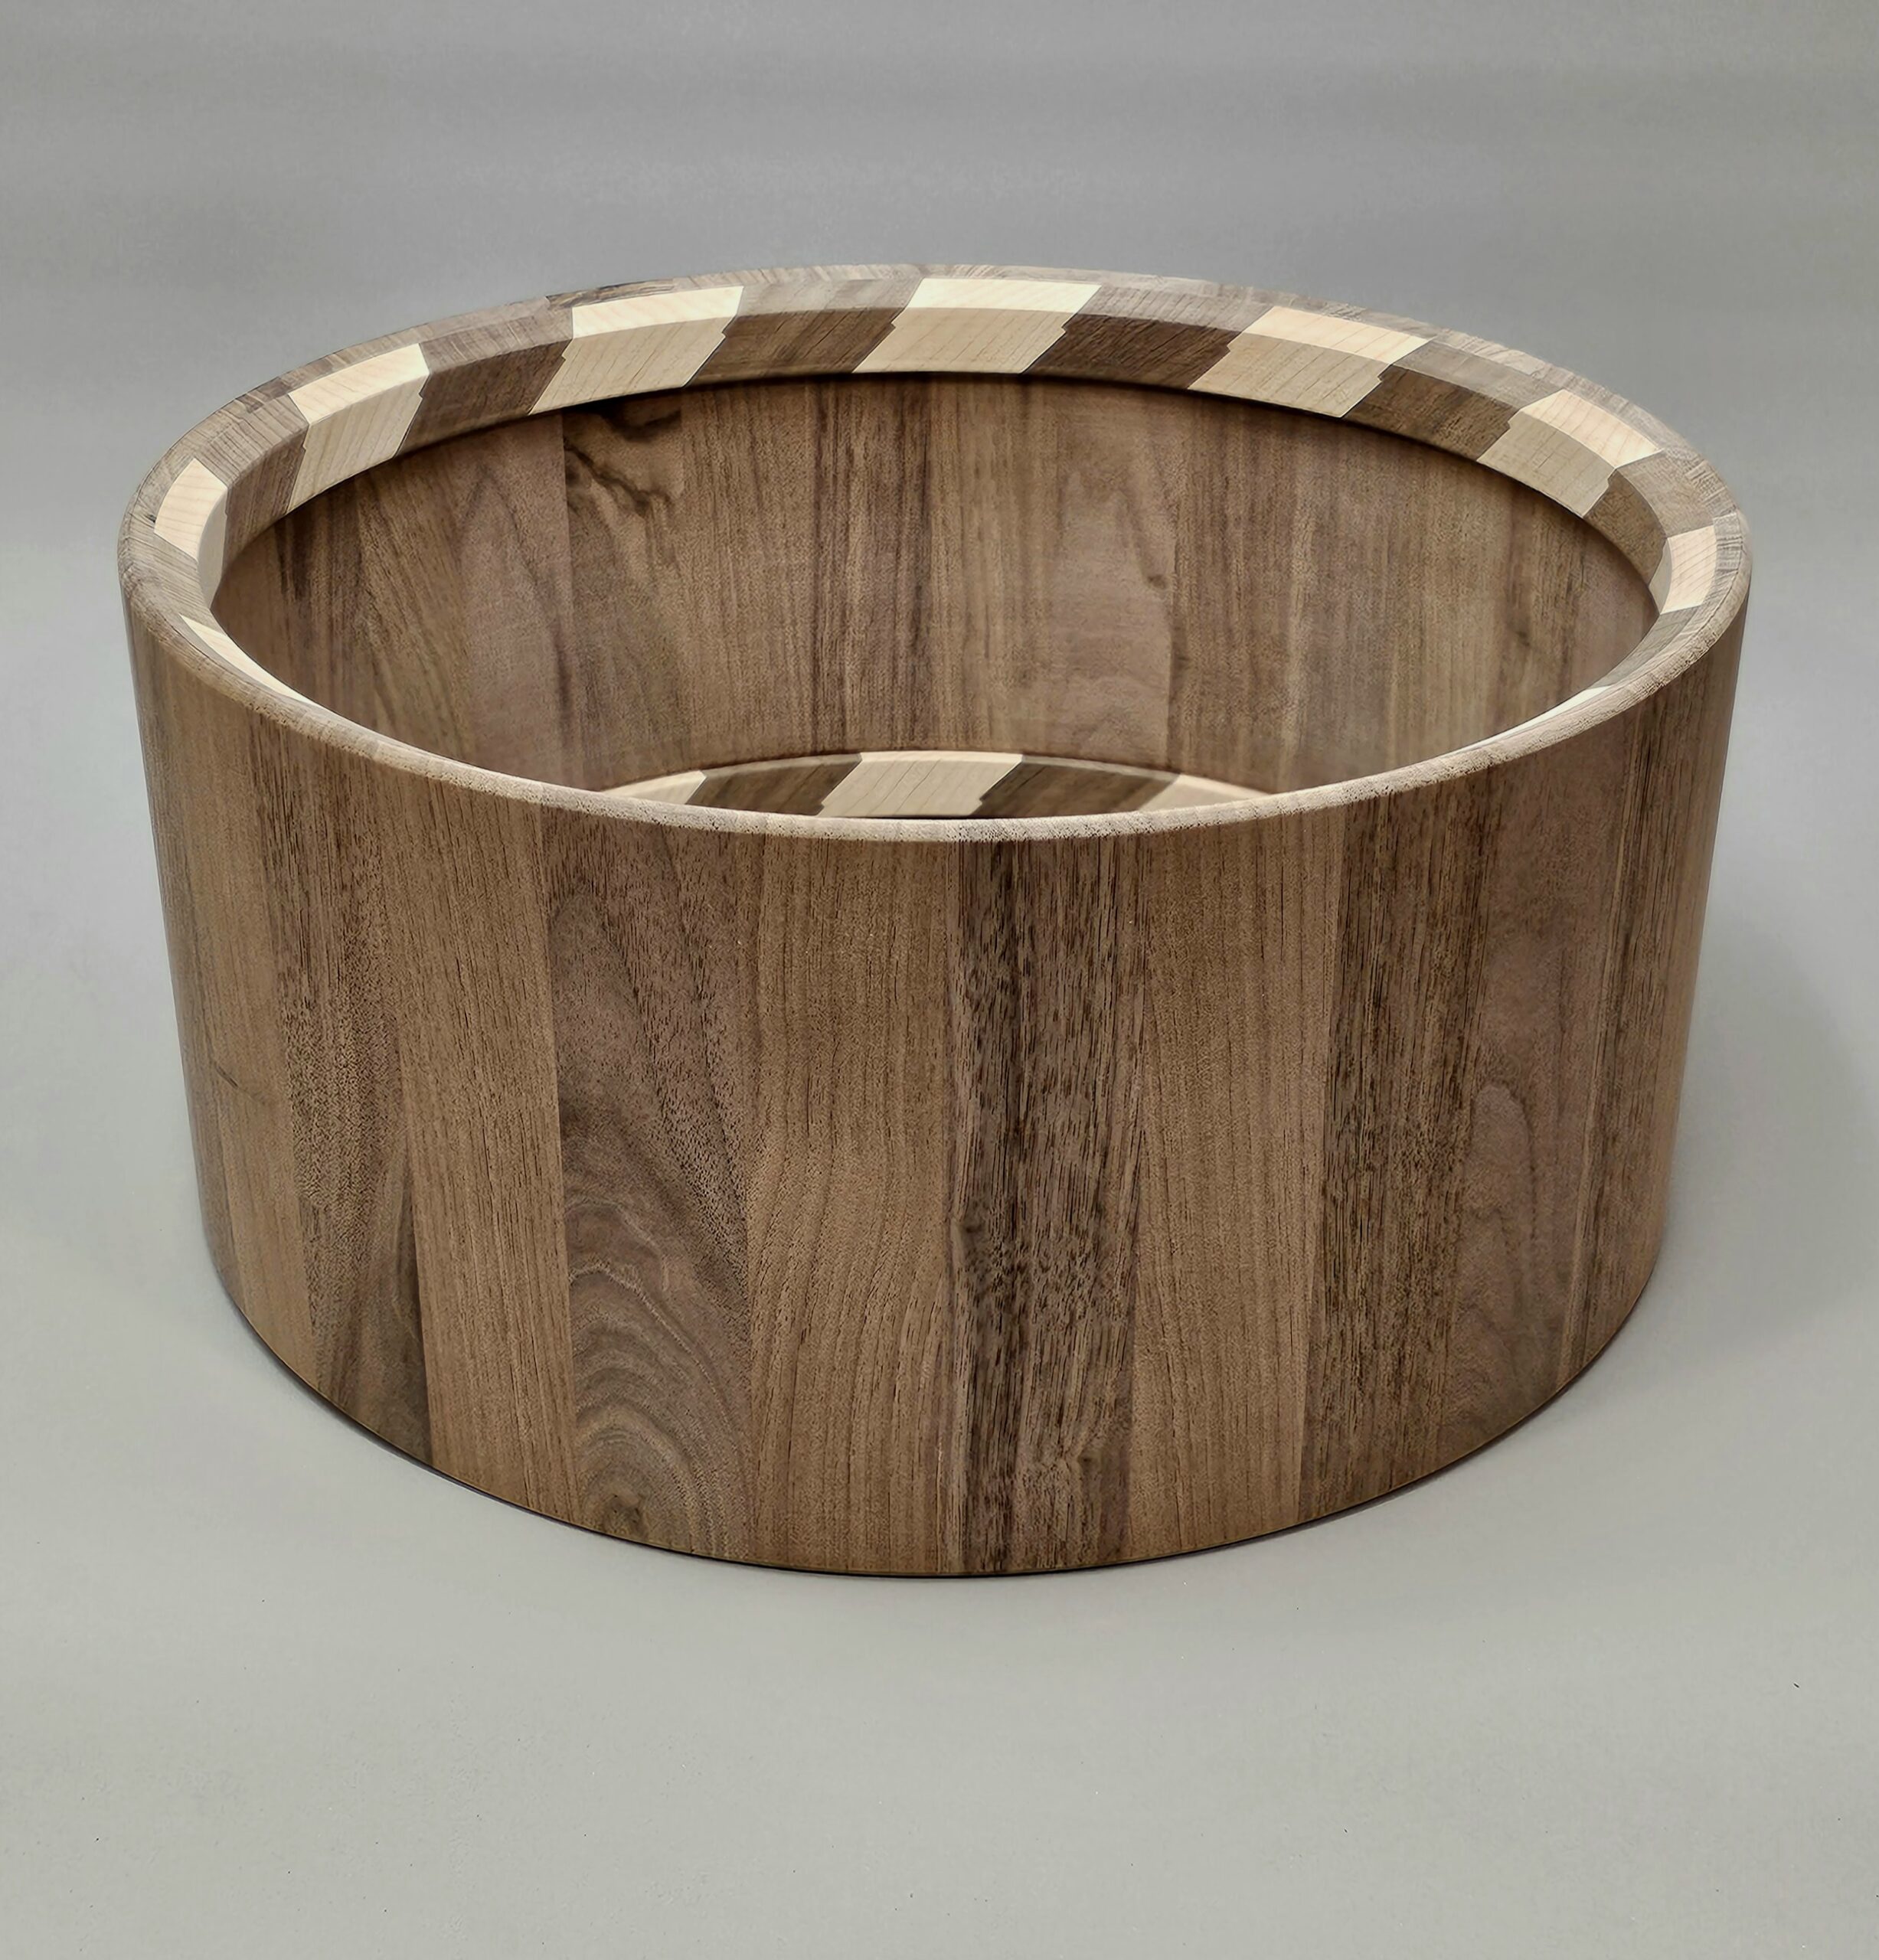 14×6.5 WALNUT 45° STABLE-STAVE SHELL